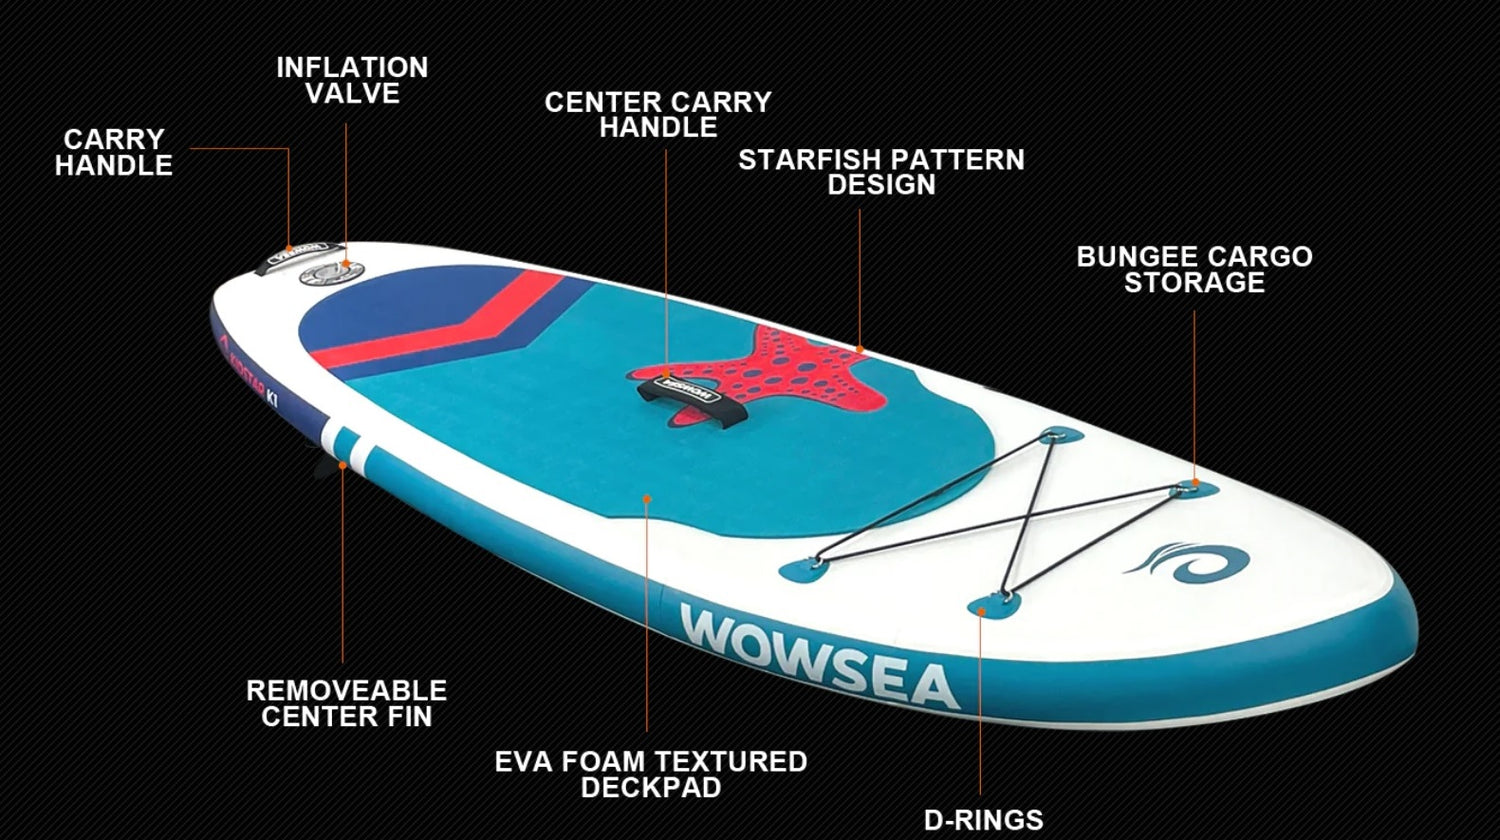 WOWSEA SUP Kidstar K1 9' Affordable Inflatable Kids SUP Paddleboard Package Features